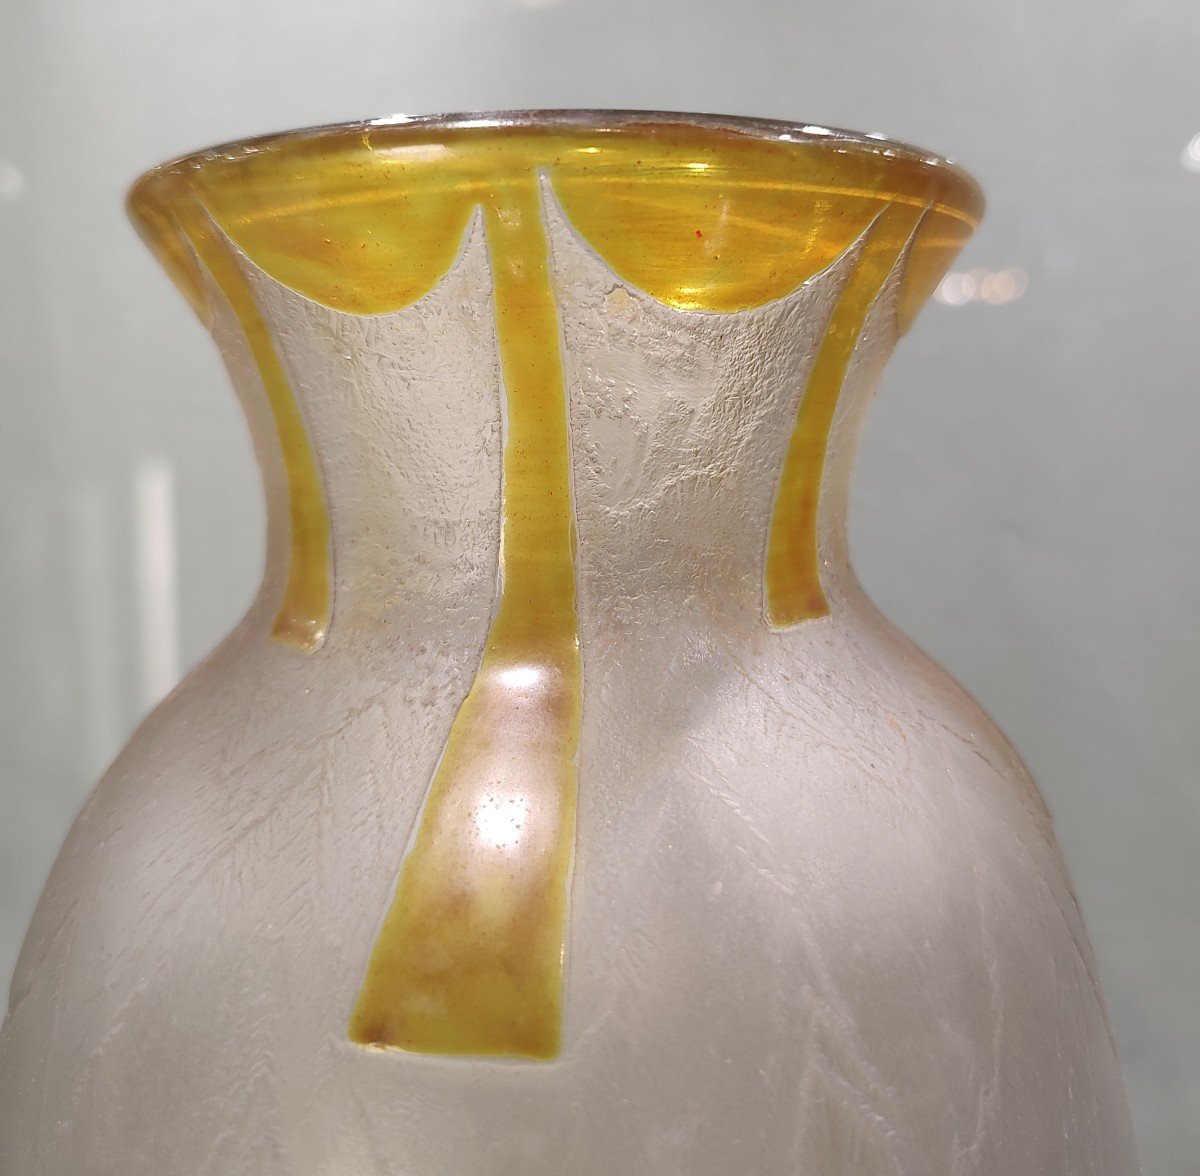 Legras - Vase Decorated With Acid-cleared Yellow Geometric Patterns.-photo-3